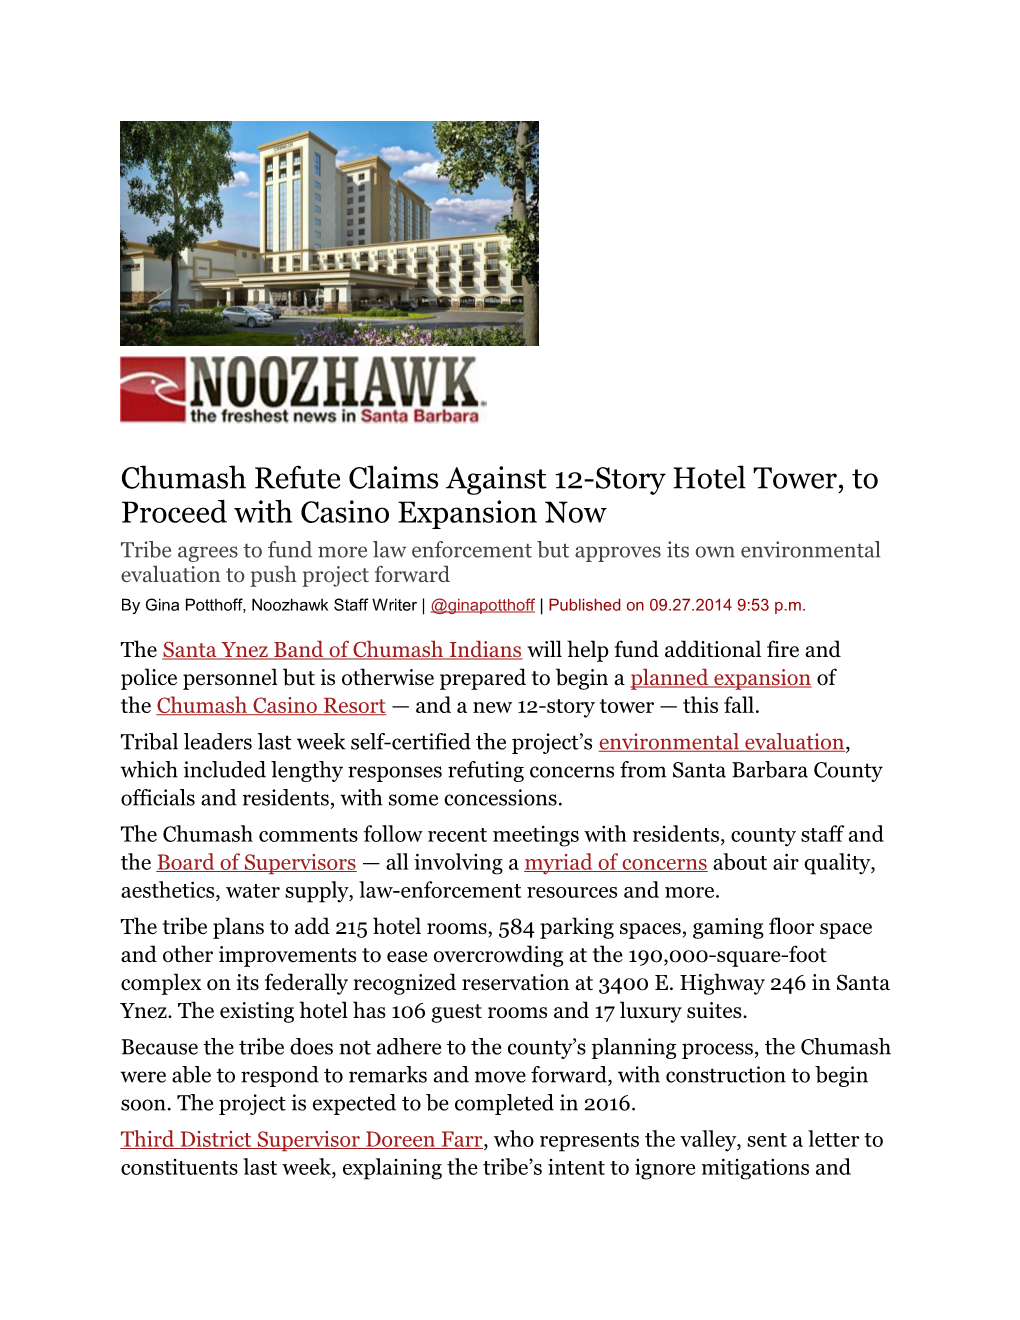 Chumash Refute Claims Against 12-Story Hotel Tower, to Proceed with Casino Expansion Now